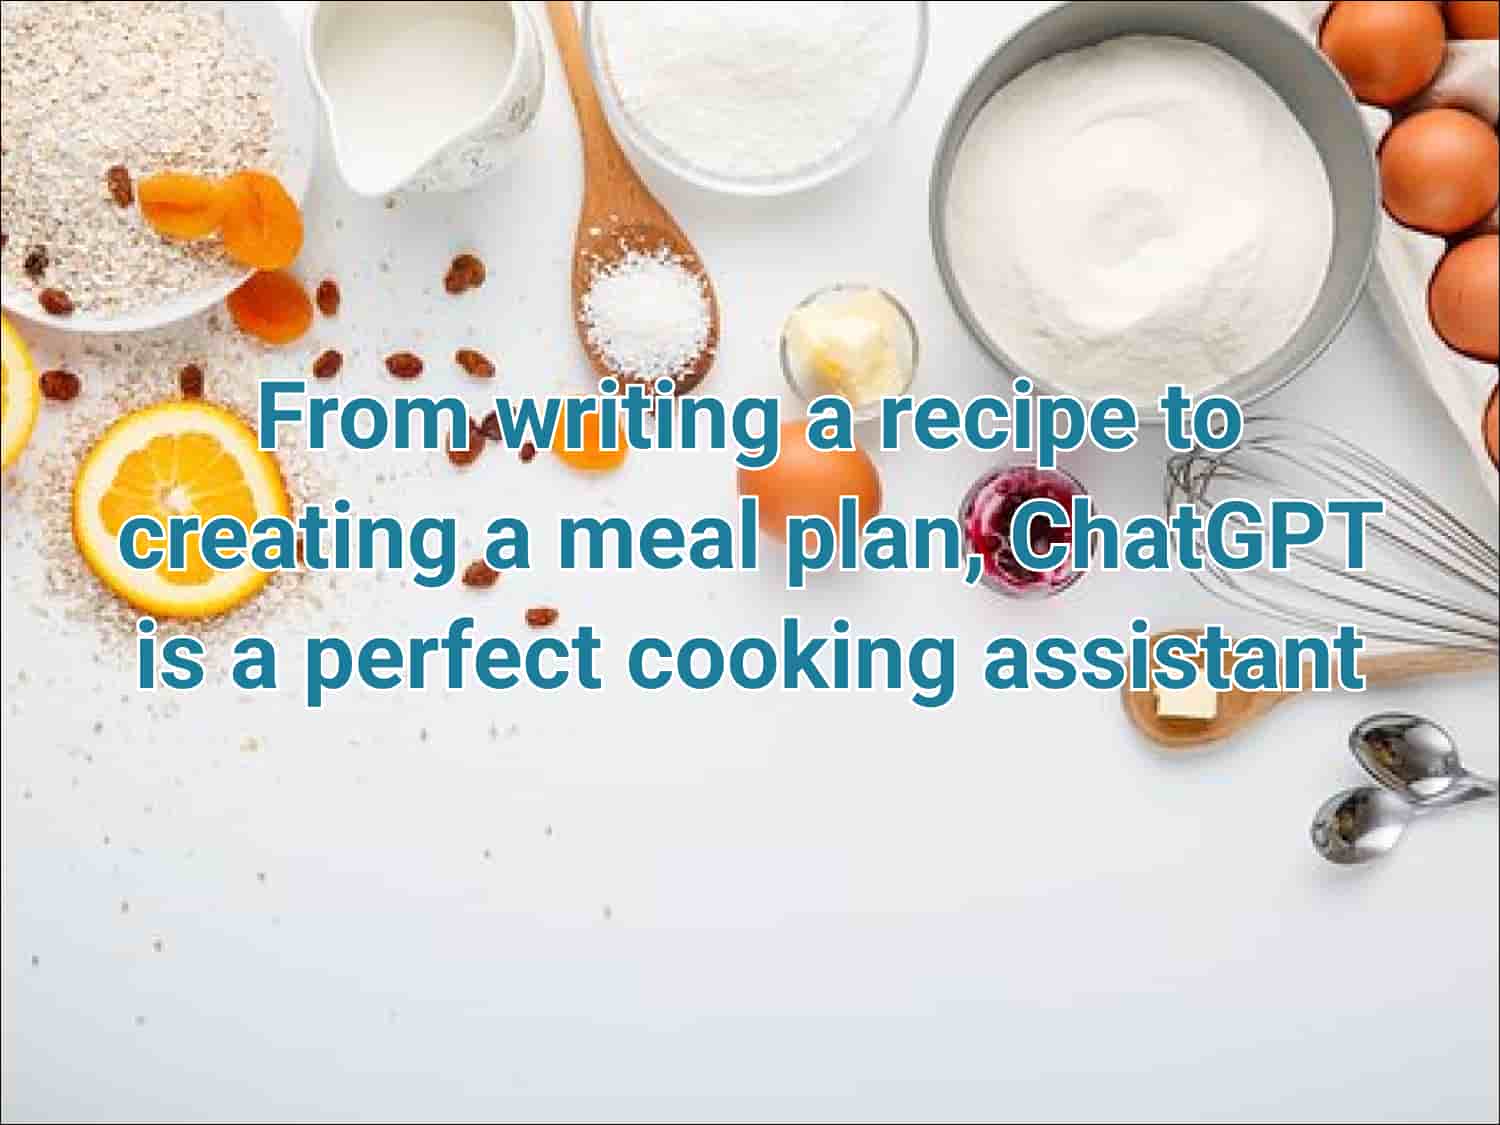 How to use ChatGPT for cooking assistance